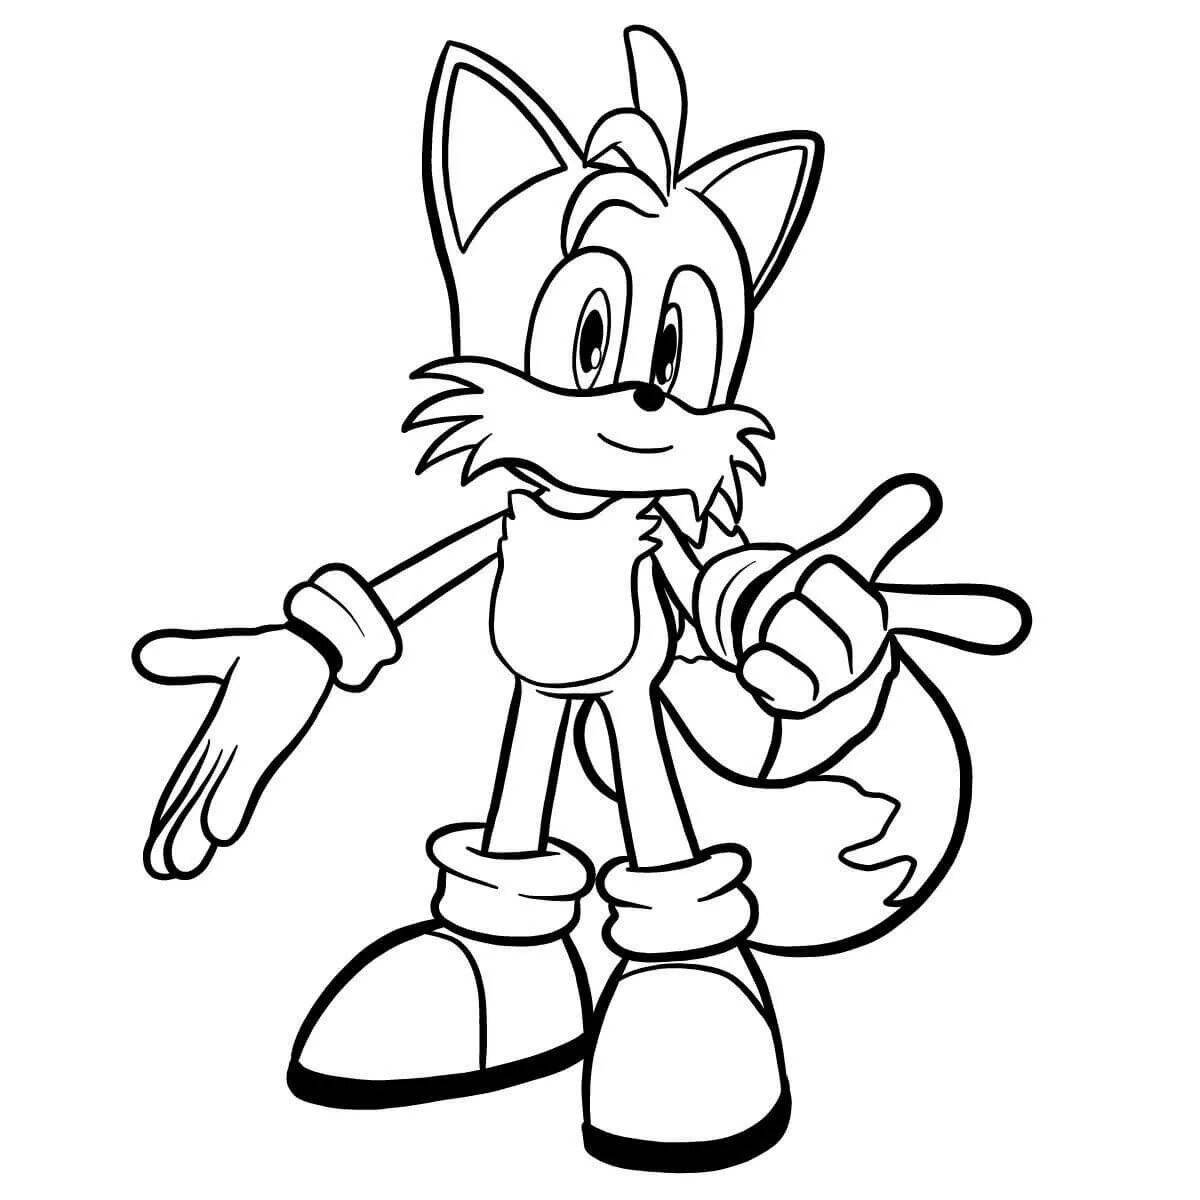 Swirling tails coloring page